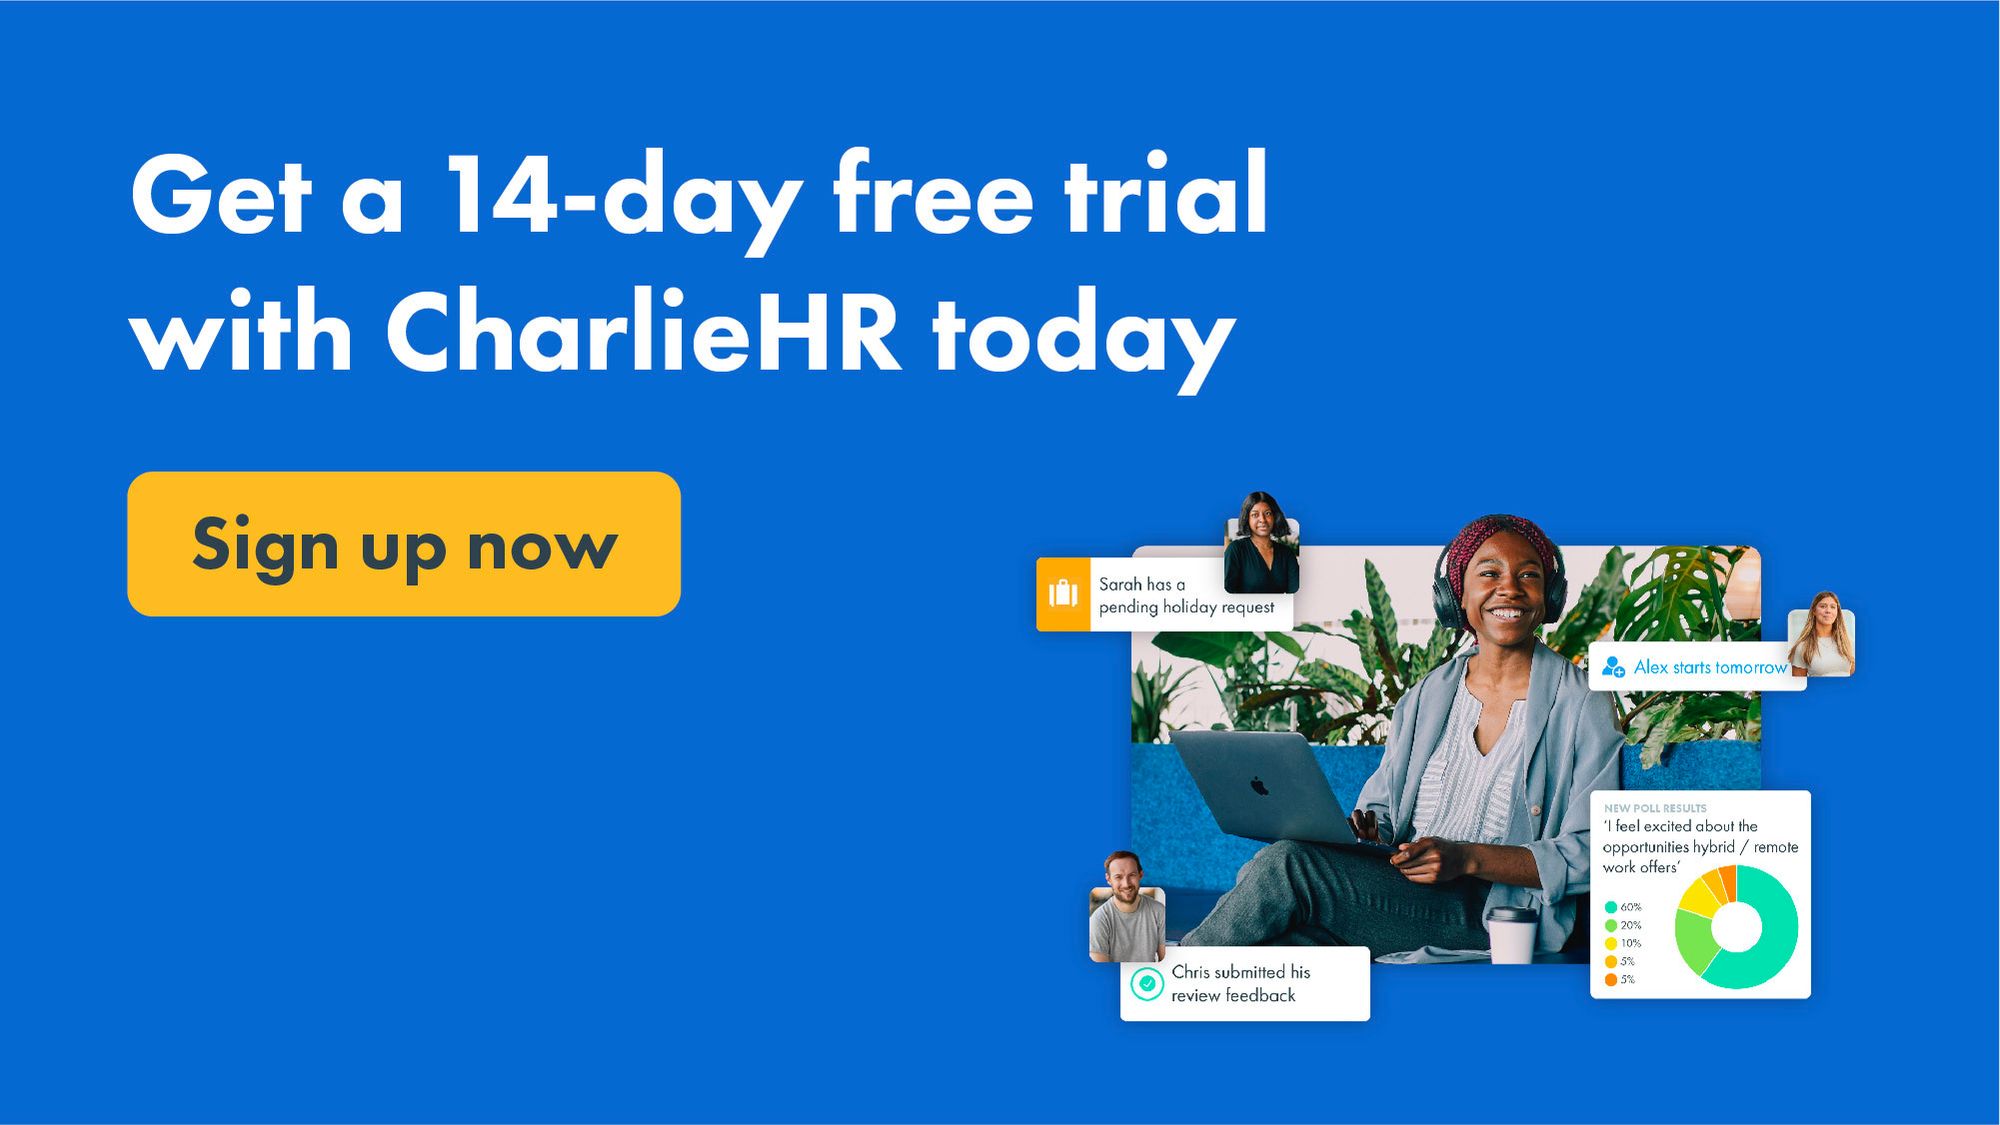 Click here to start a 14 day free trial with CharlieHR